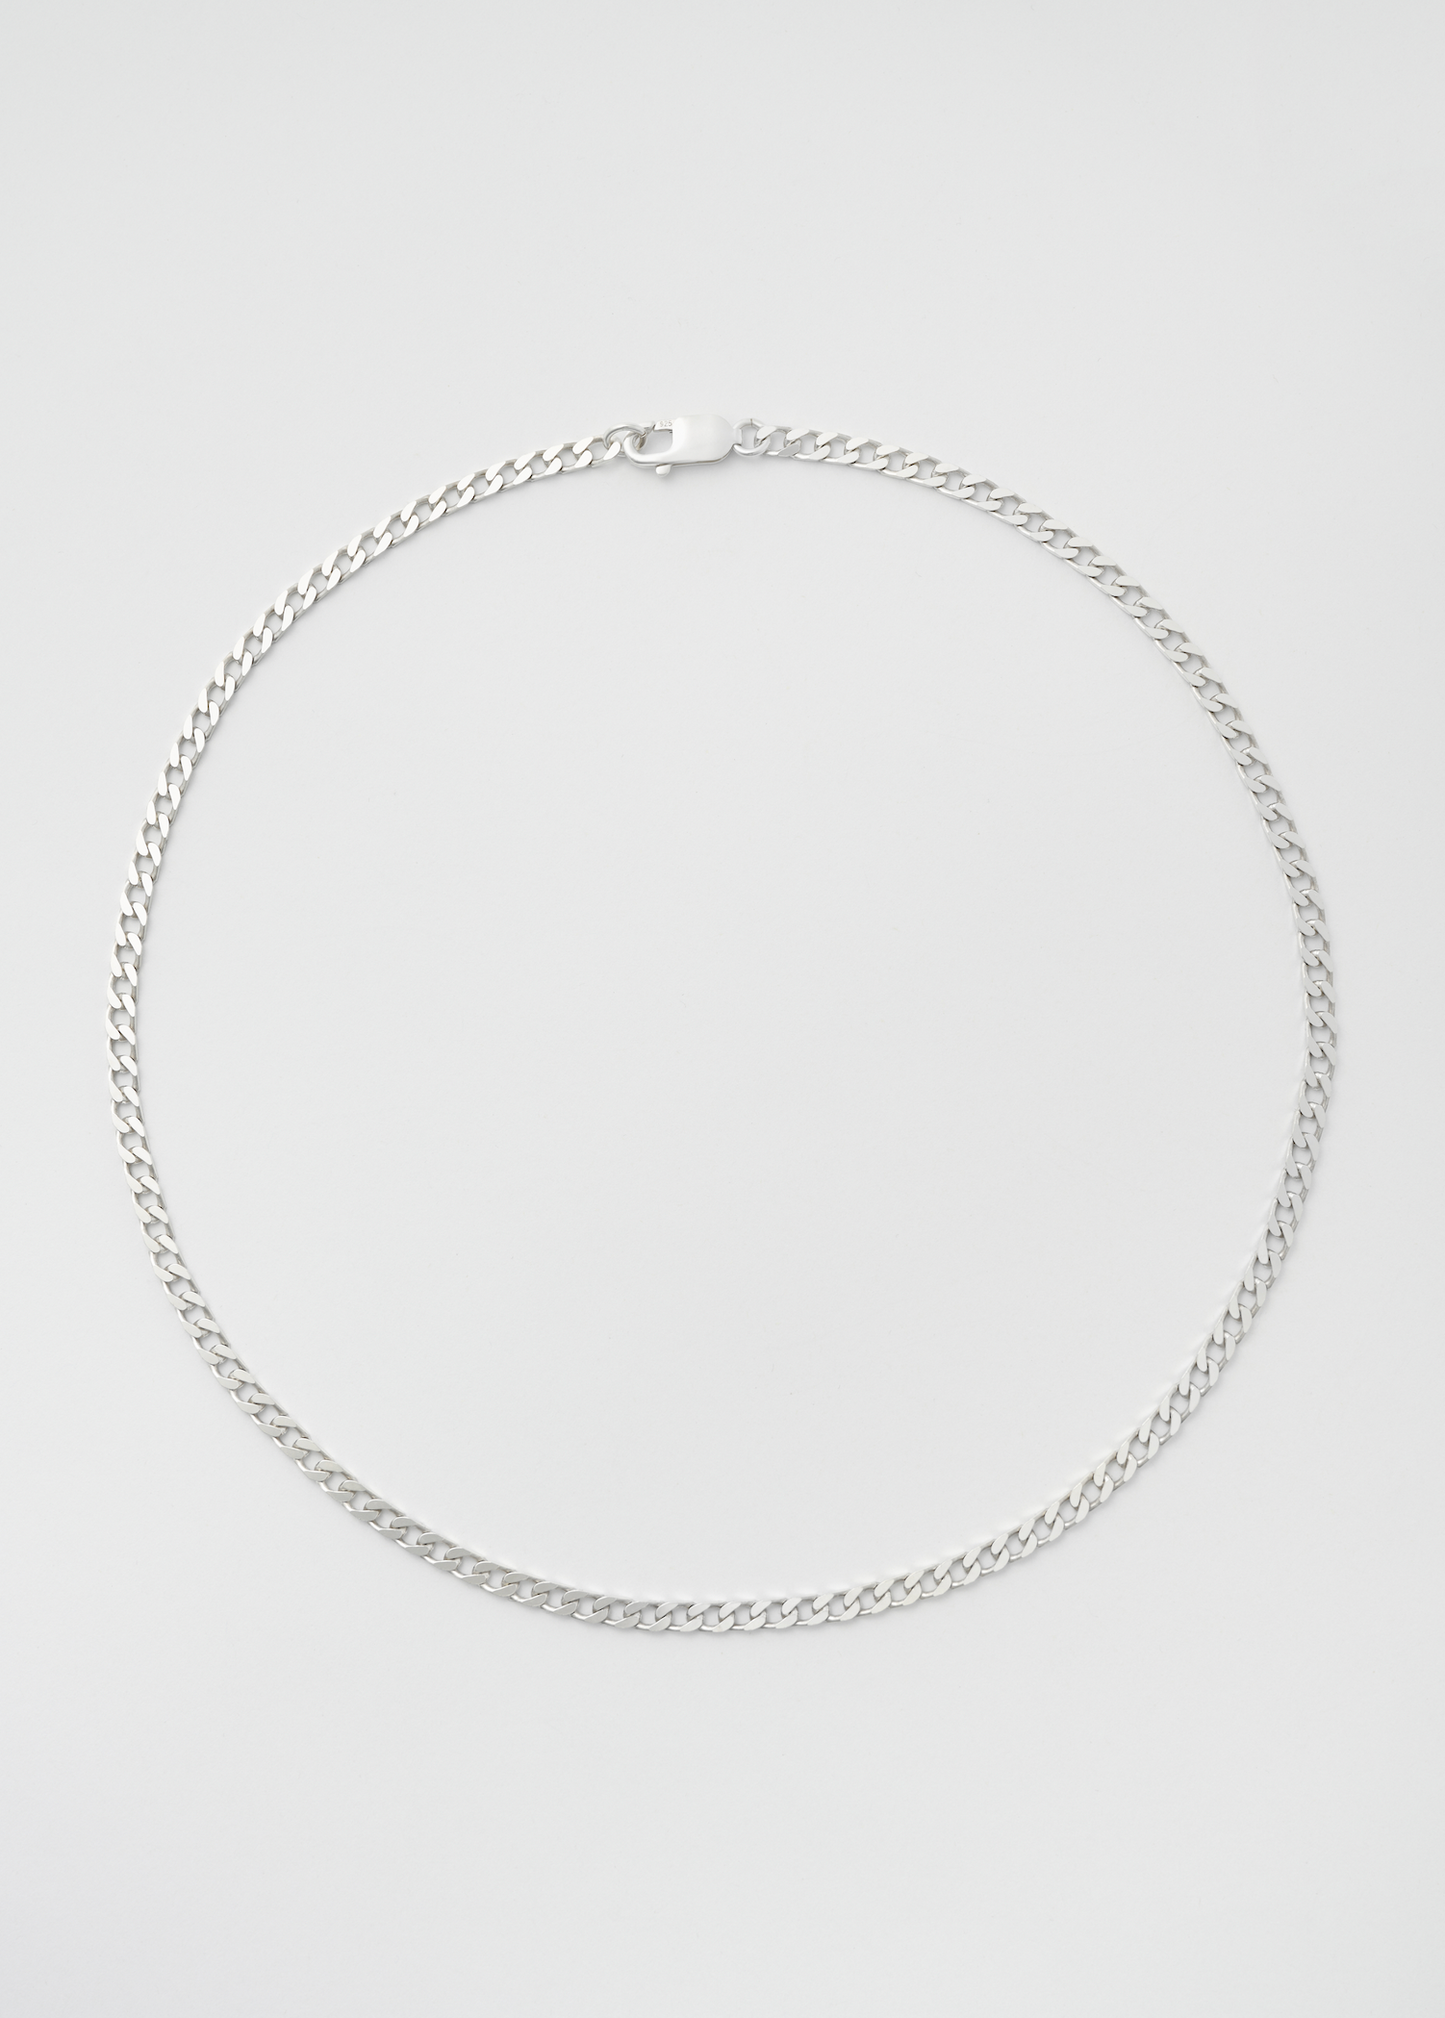 Silver Pansar Necklace 4mm